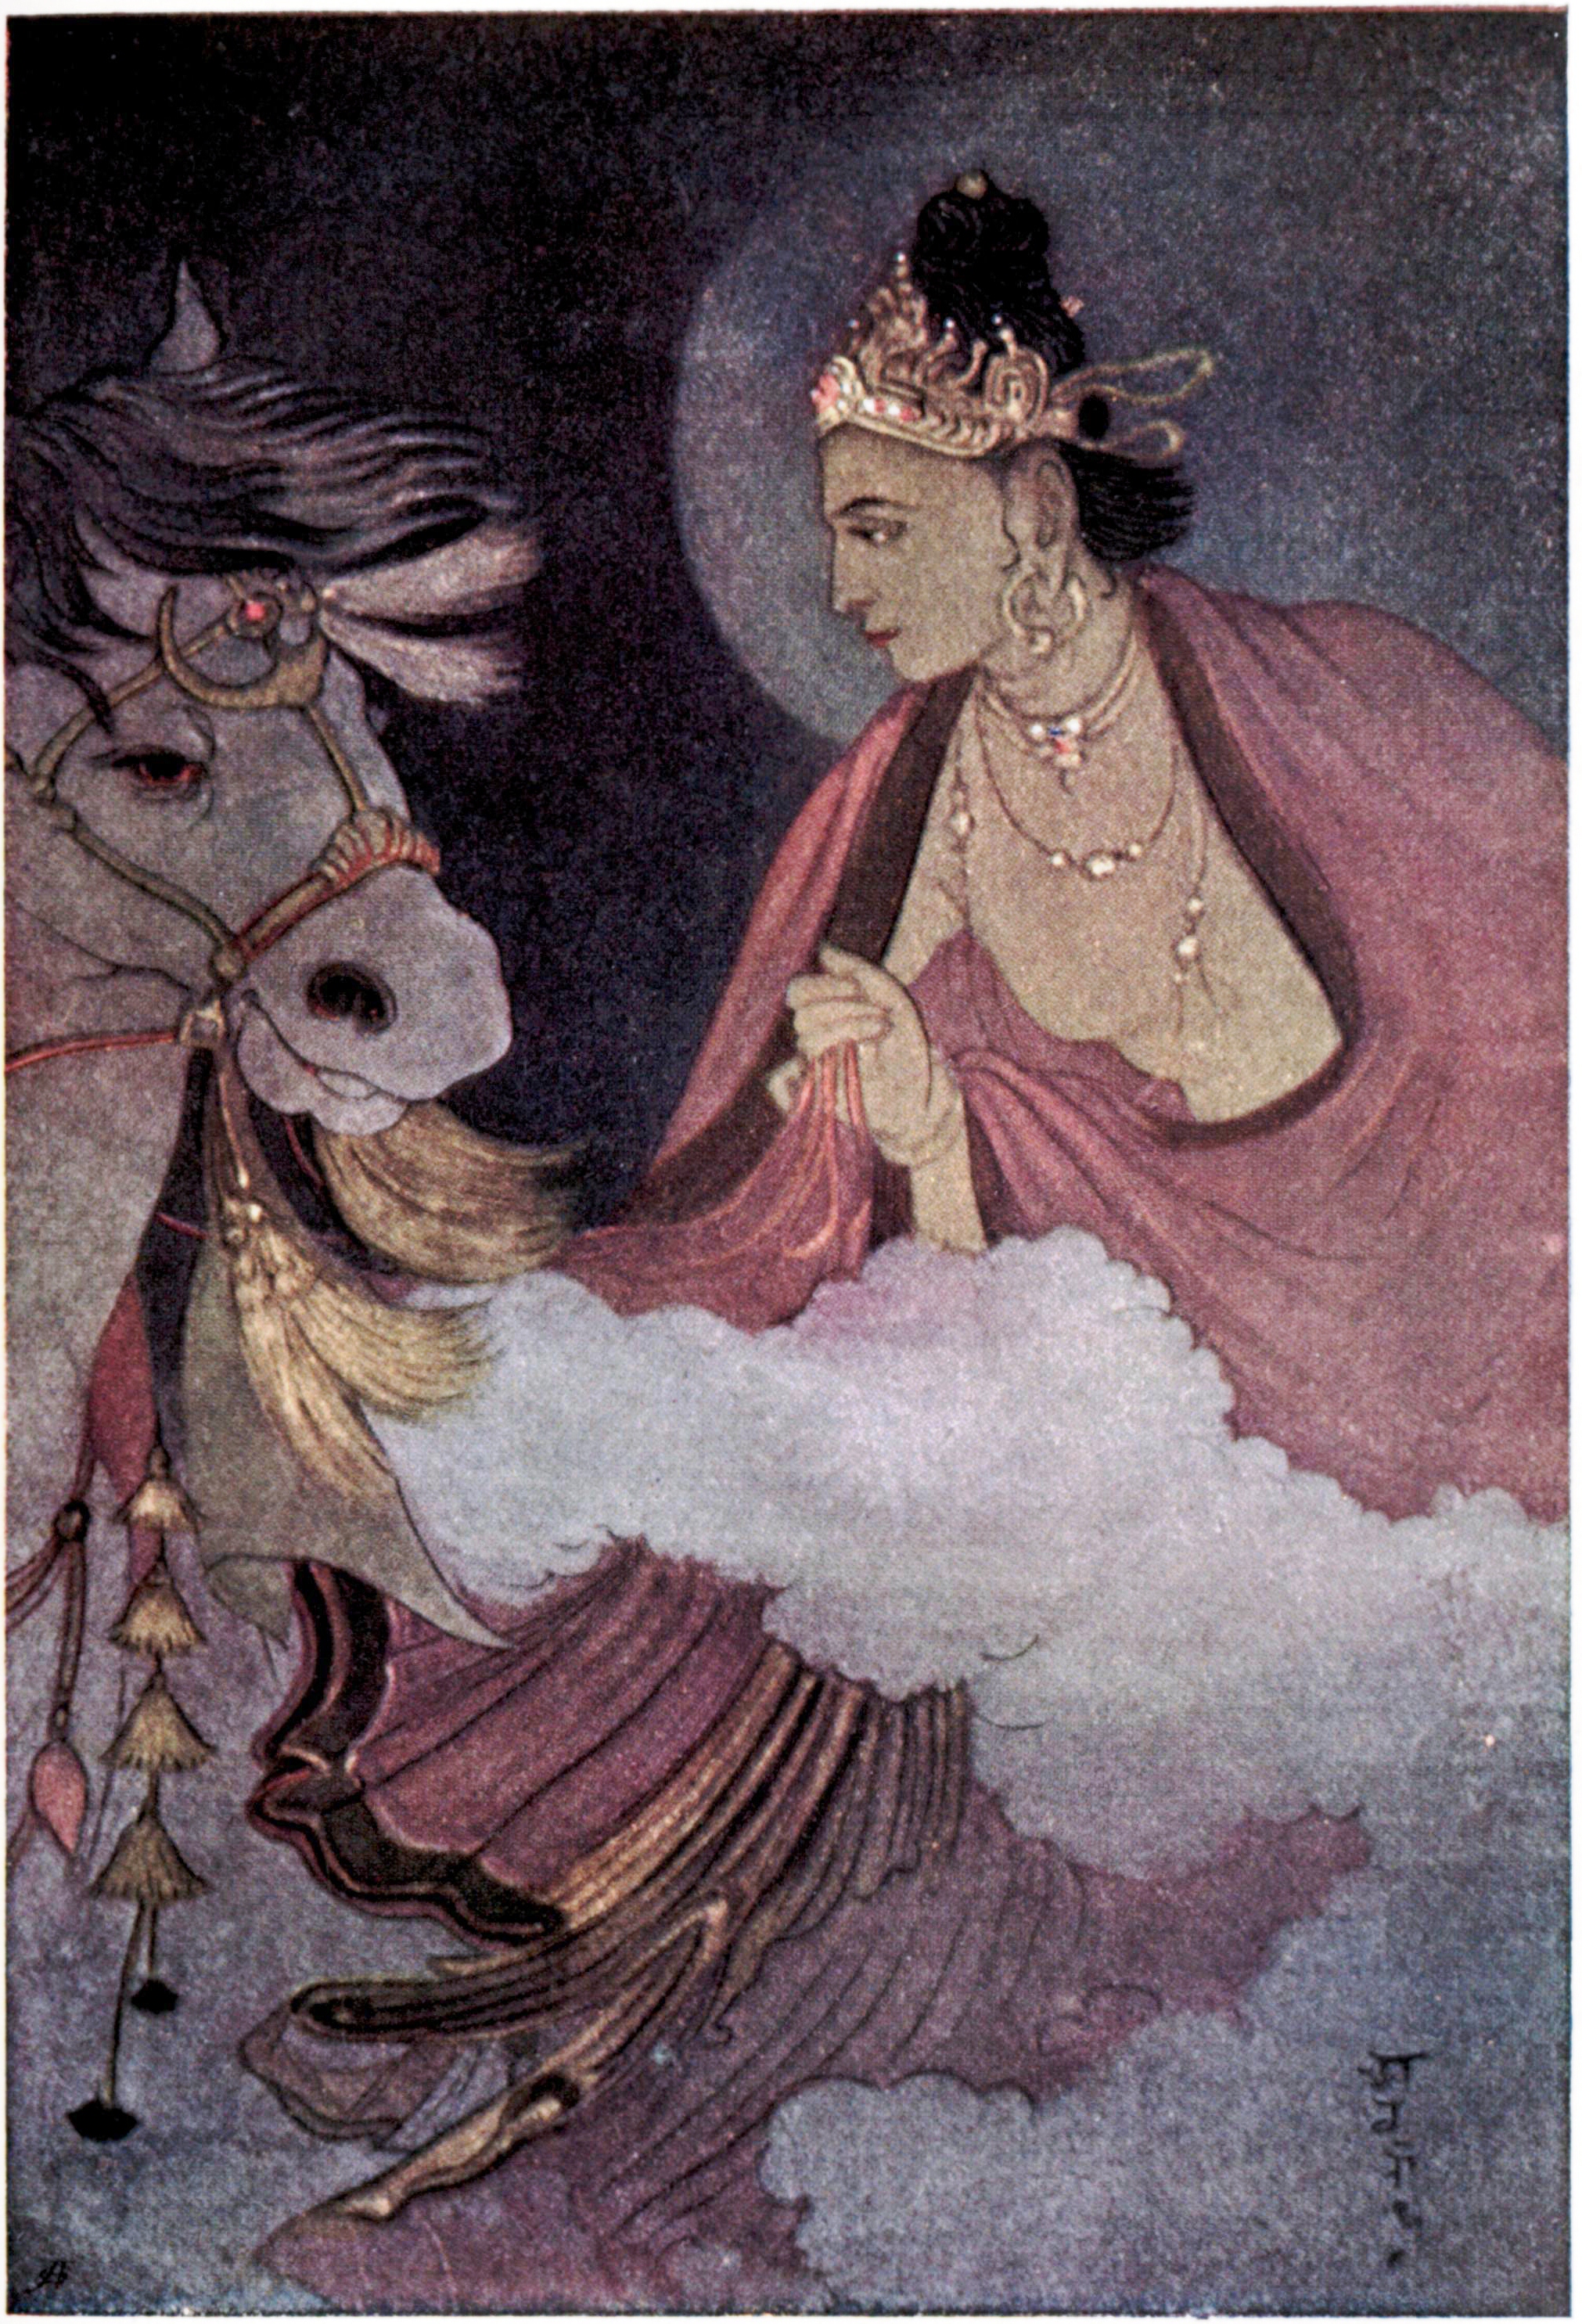 Artist: Abanindranath Tagore Source: Myths of the Hindus & Buddhists(1914) Photo Credit: Wikimedia Commons